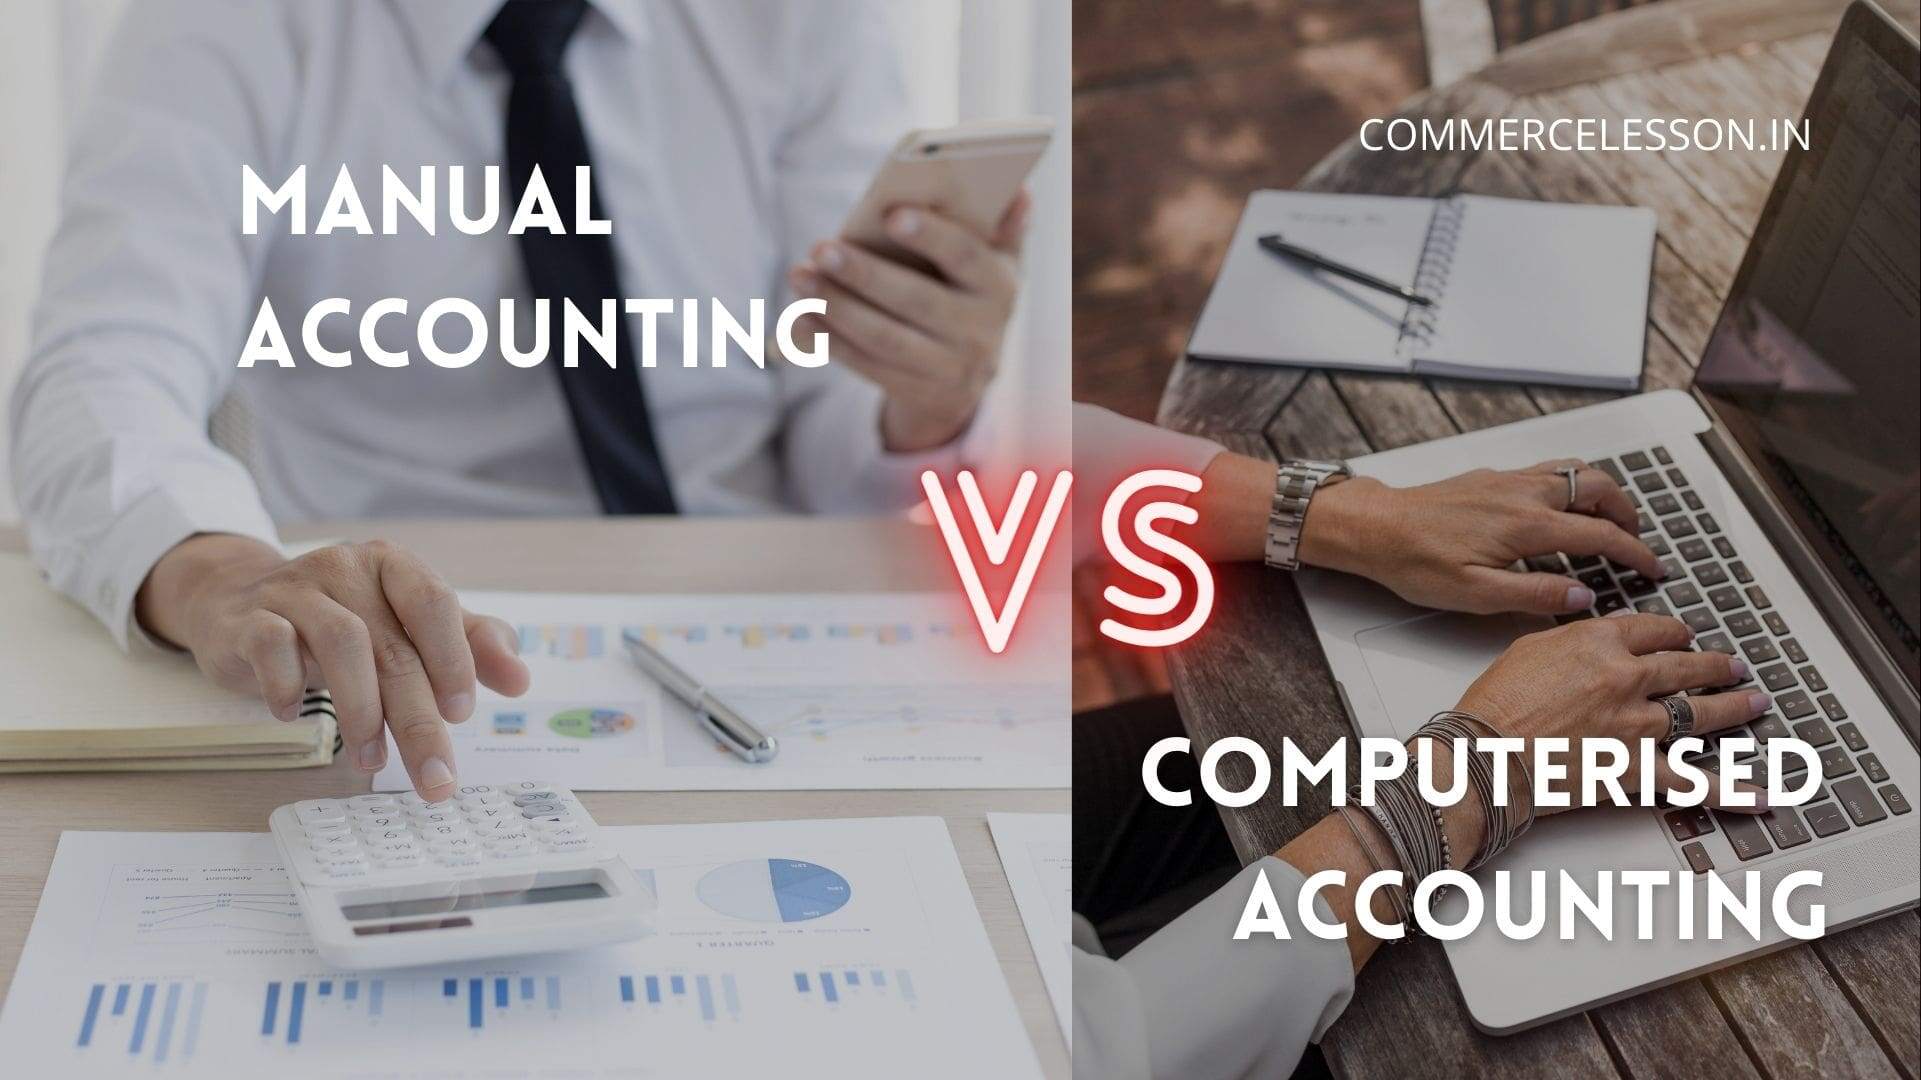 Difference between Manual Accounting and Computerised Accounting